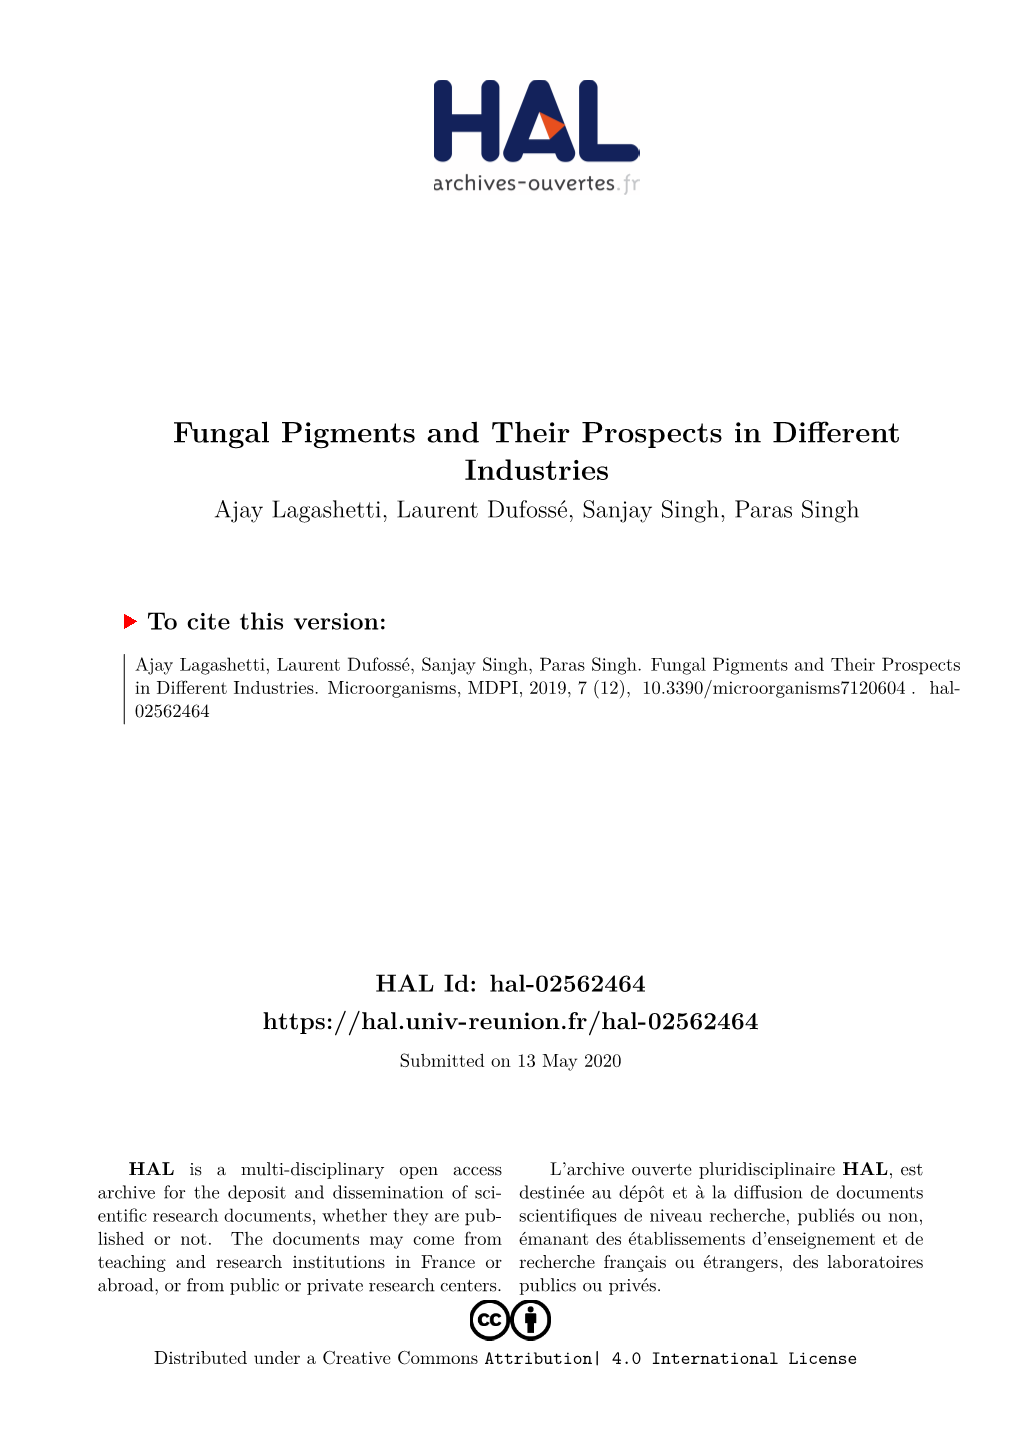 Fungal Pigments and Their Prospects in Different Industries Ajay Lagashetti, Laurent Dufossé, Sanjay Singh, Paras Singh